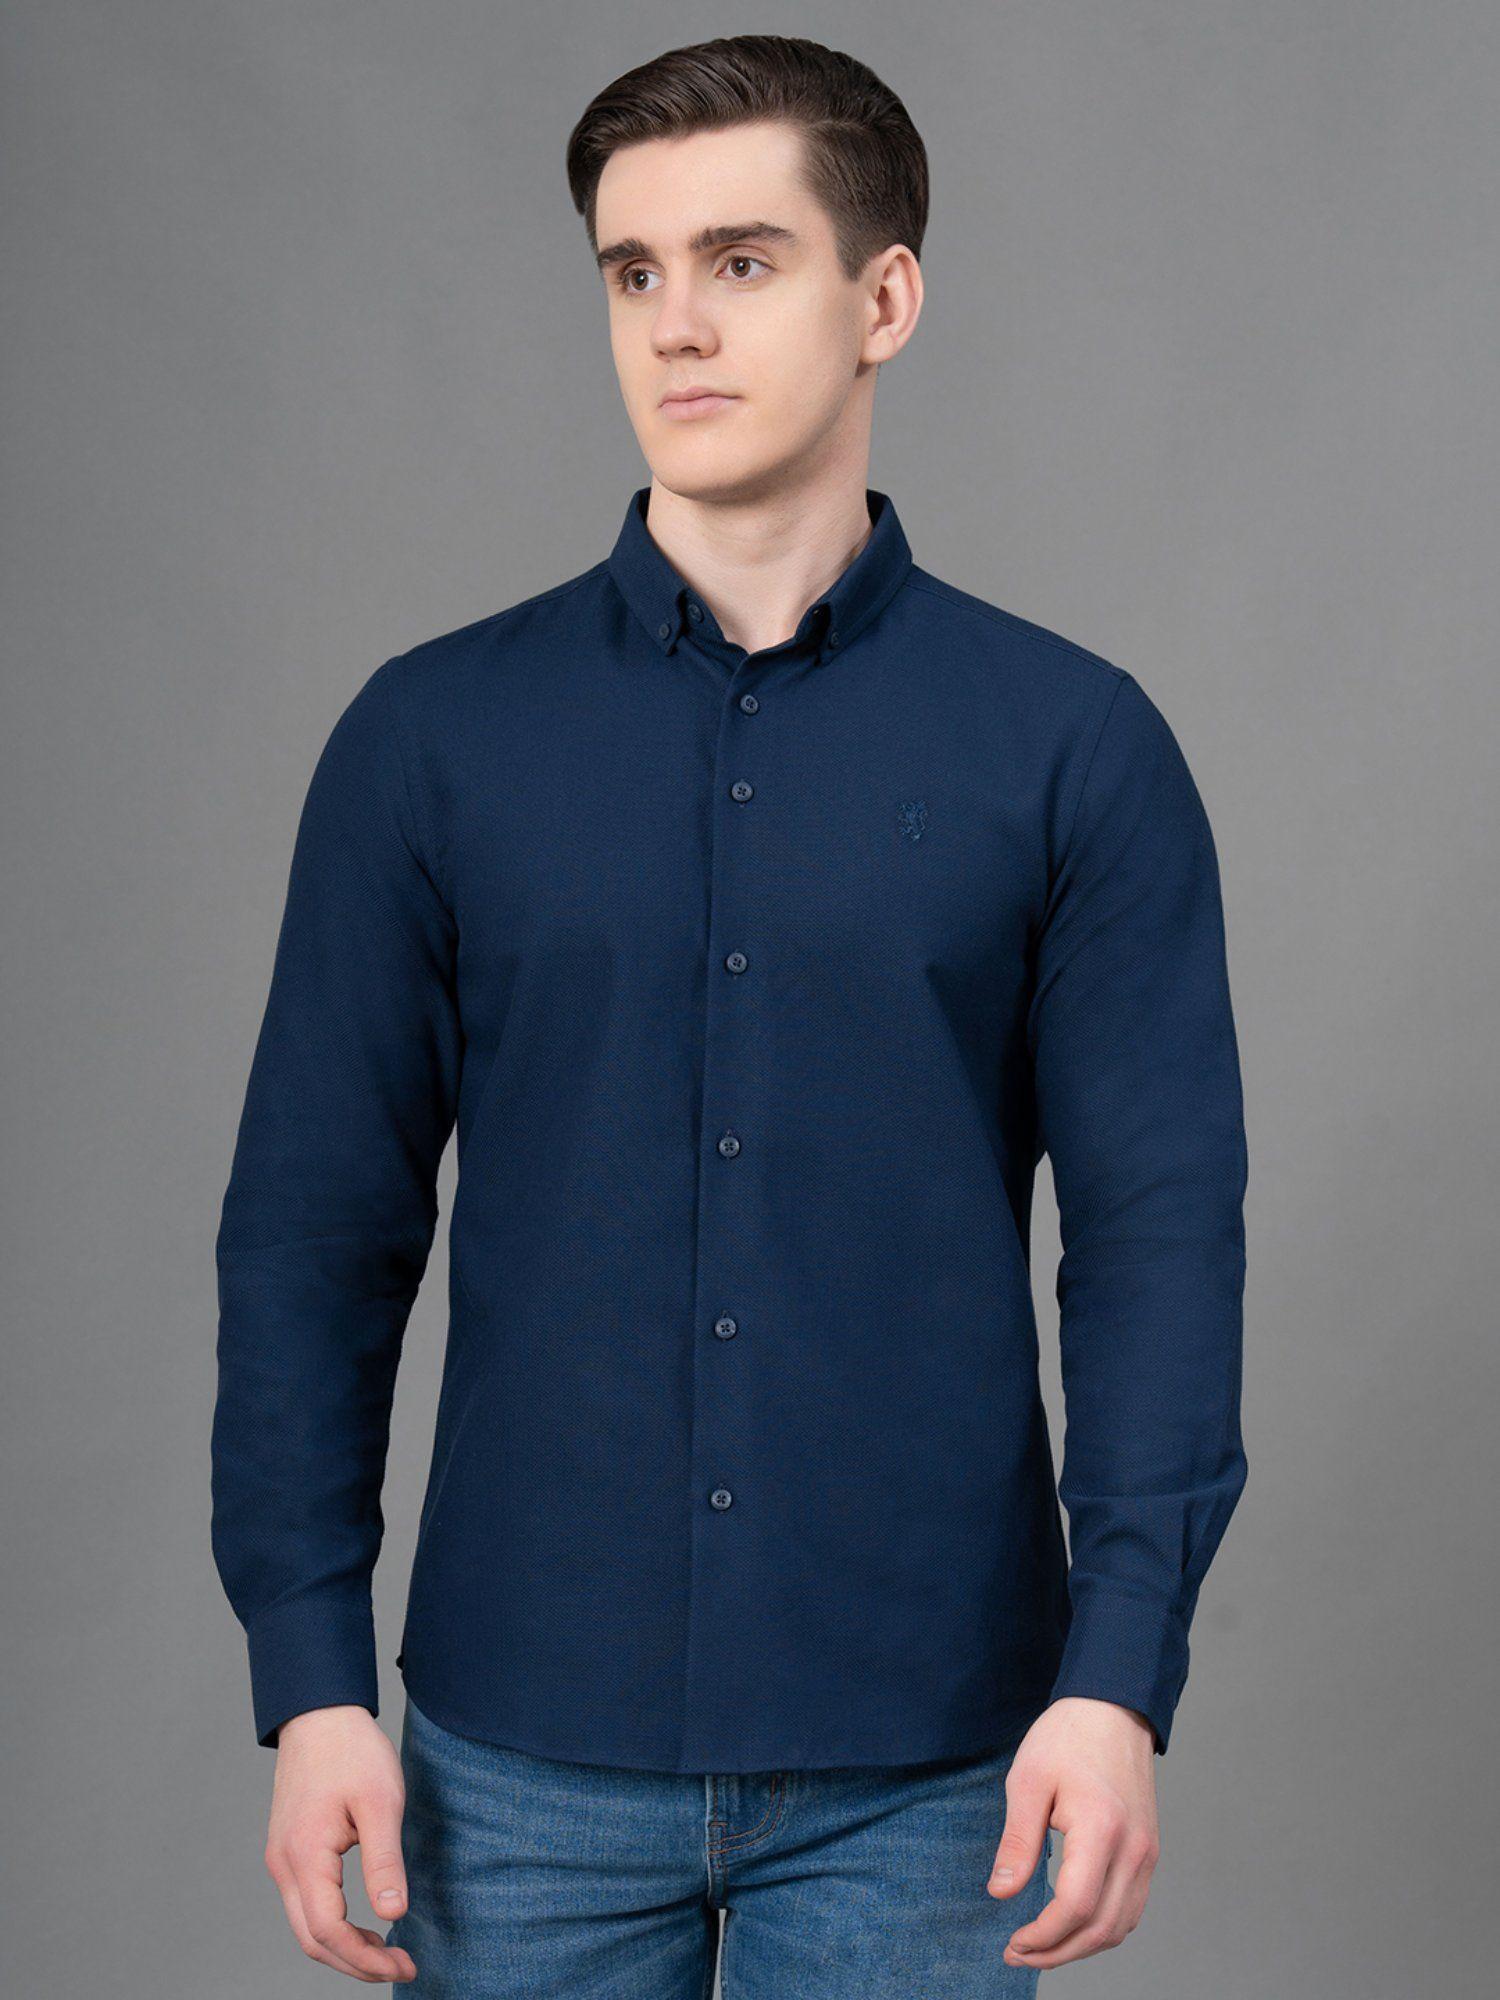 navy solid dobby cotton polyester men's shirt